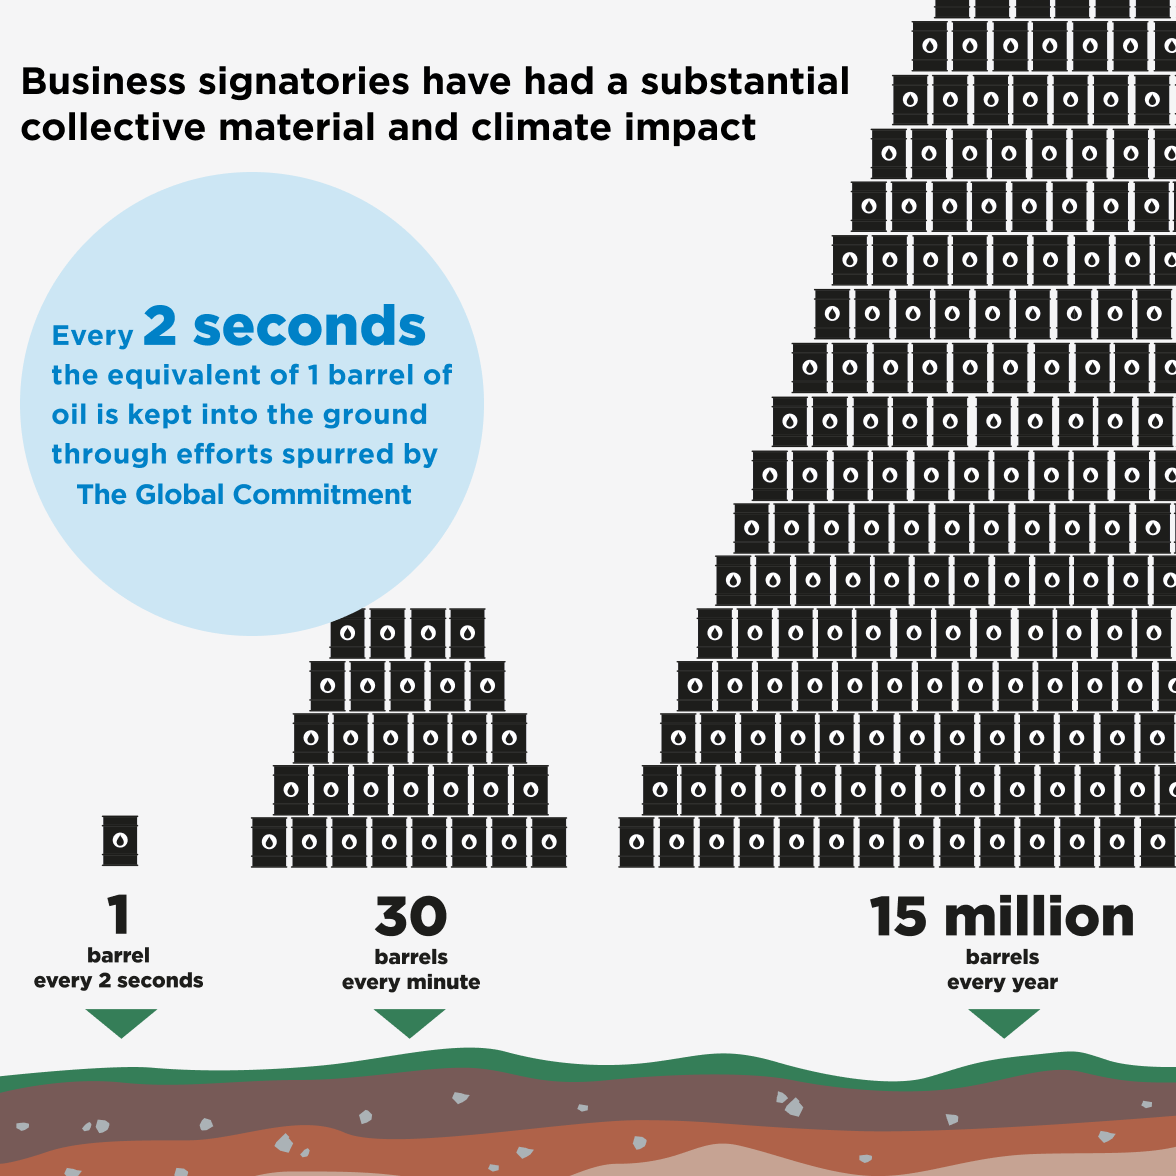 Business signatories have had a substantial collective material and climate impact